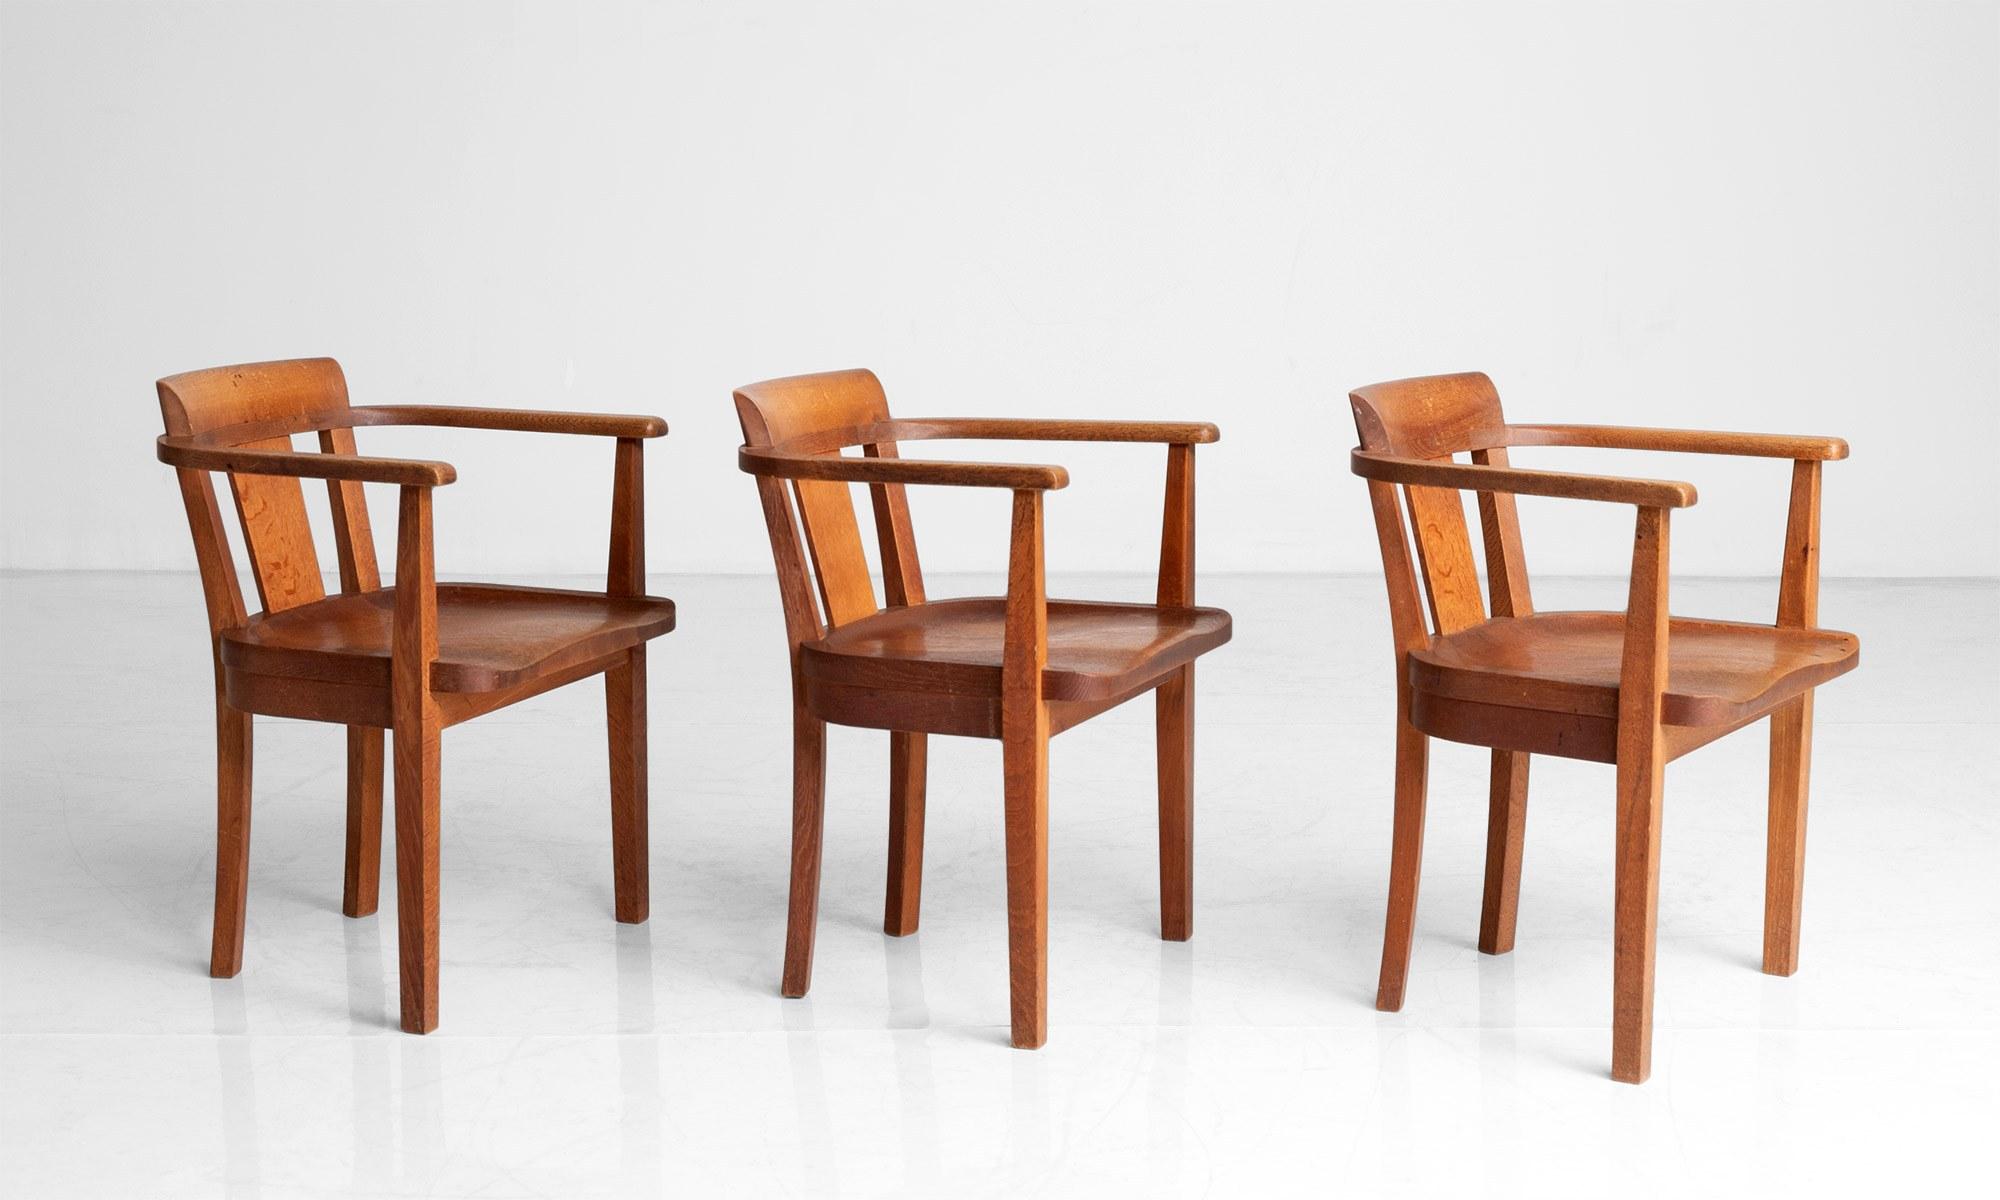 English Set of '10' Oak Dining Chairs by Gordon Russell, England, circa 1930